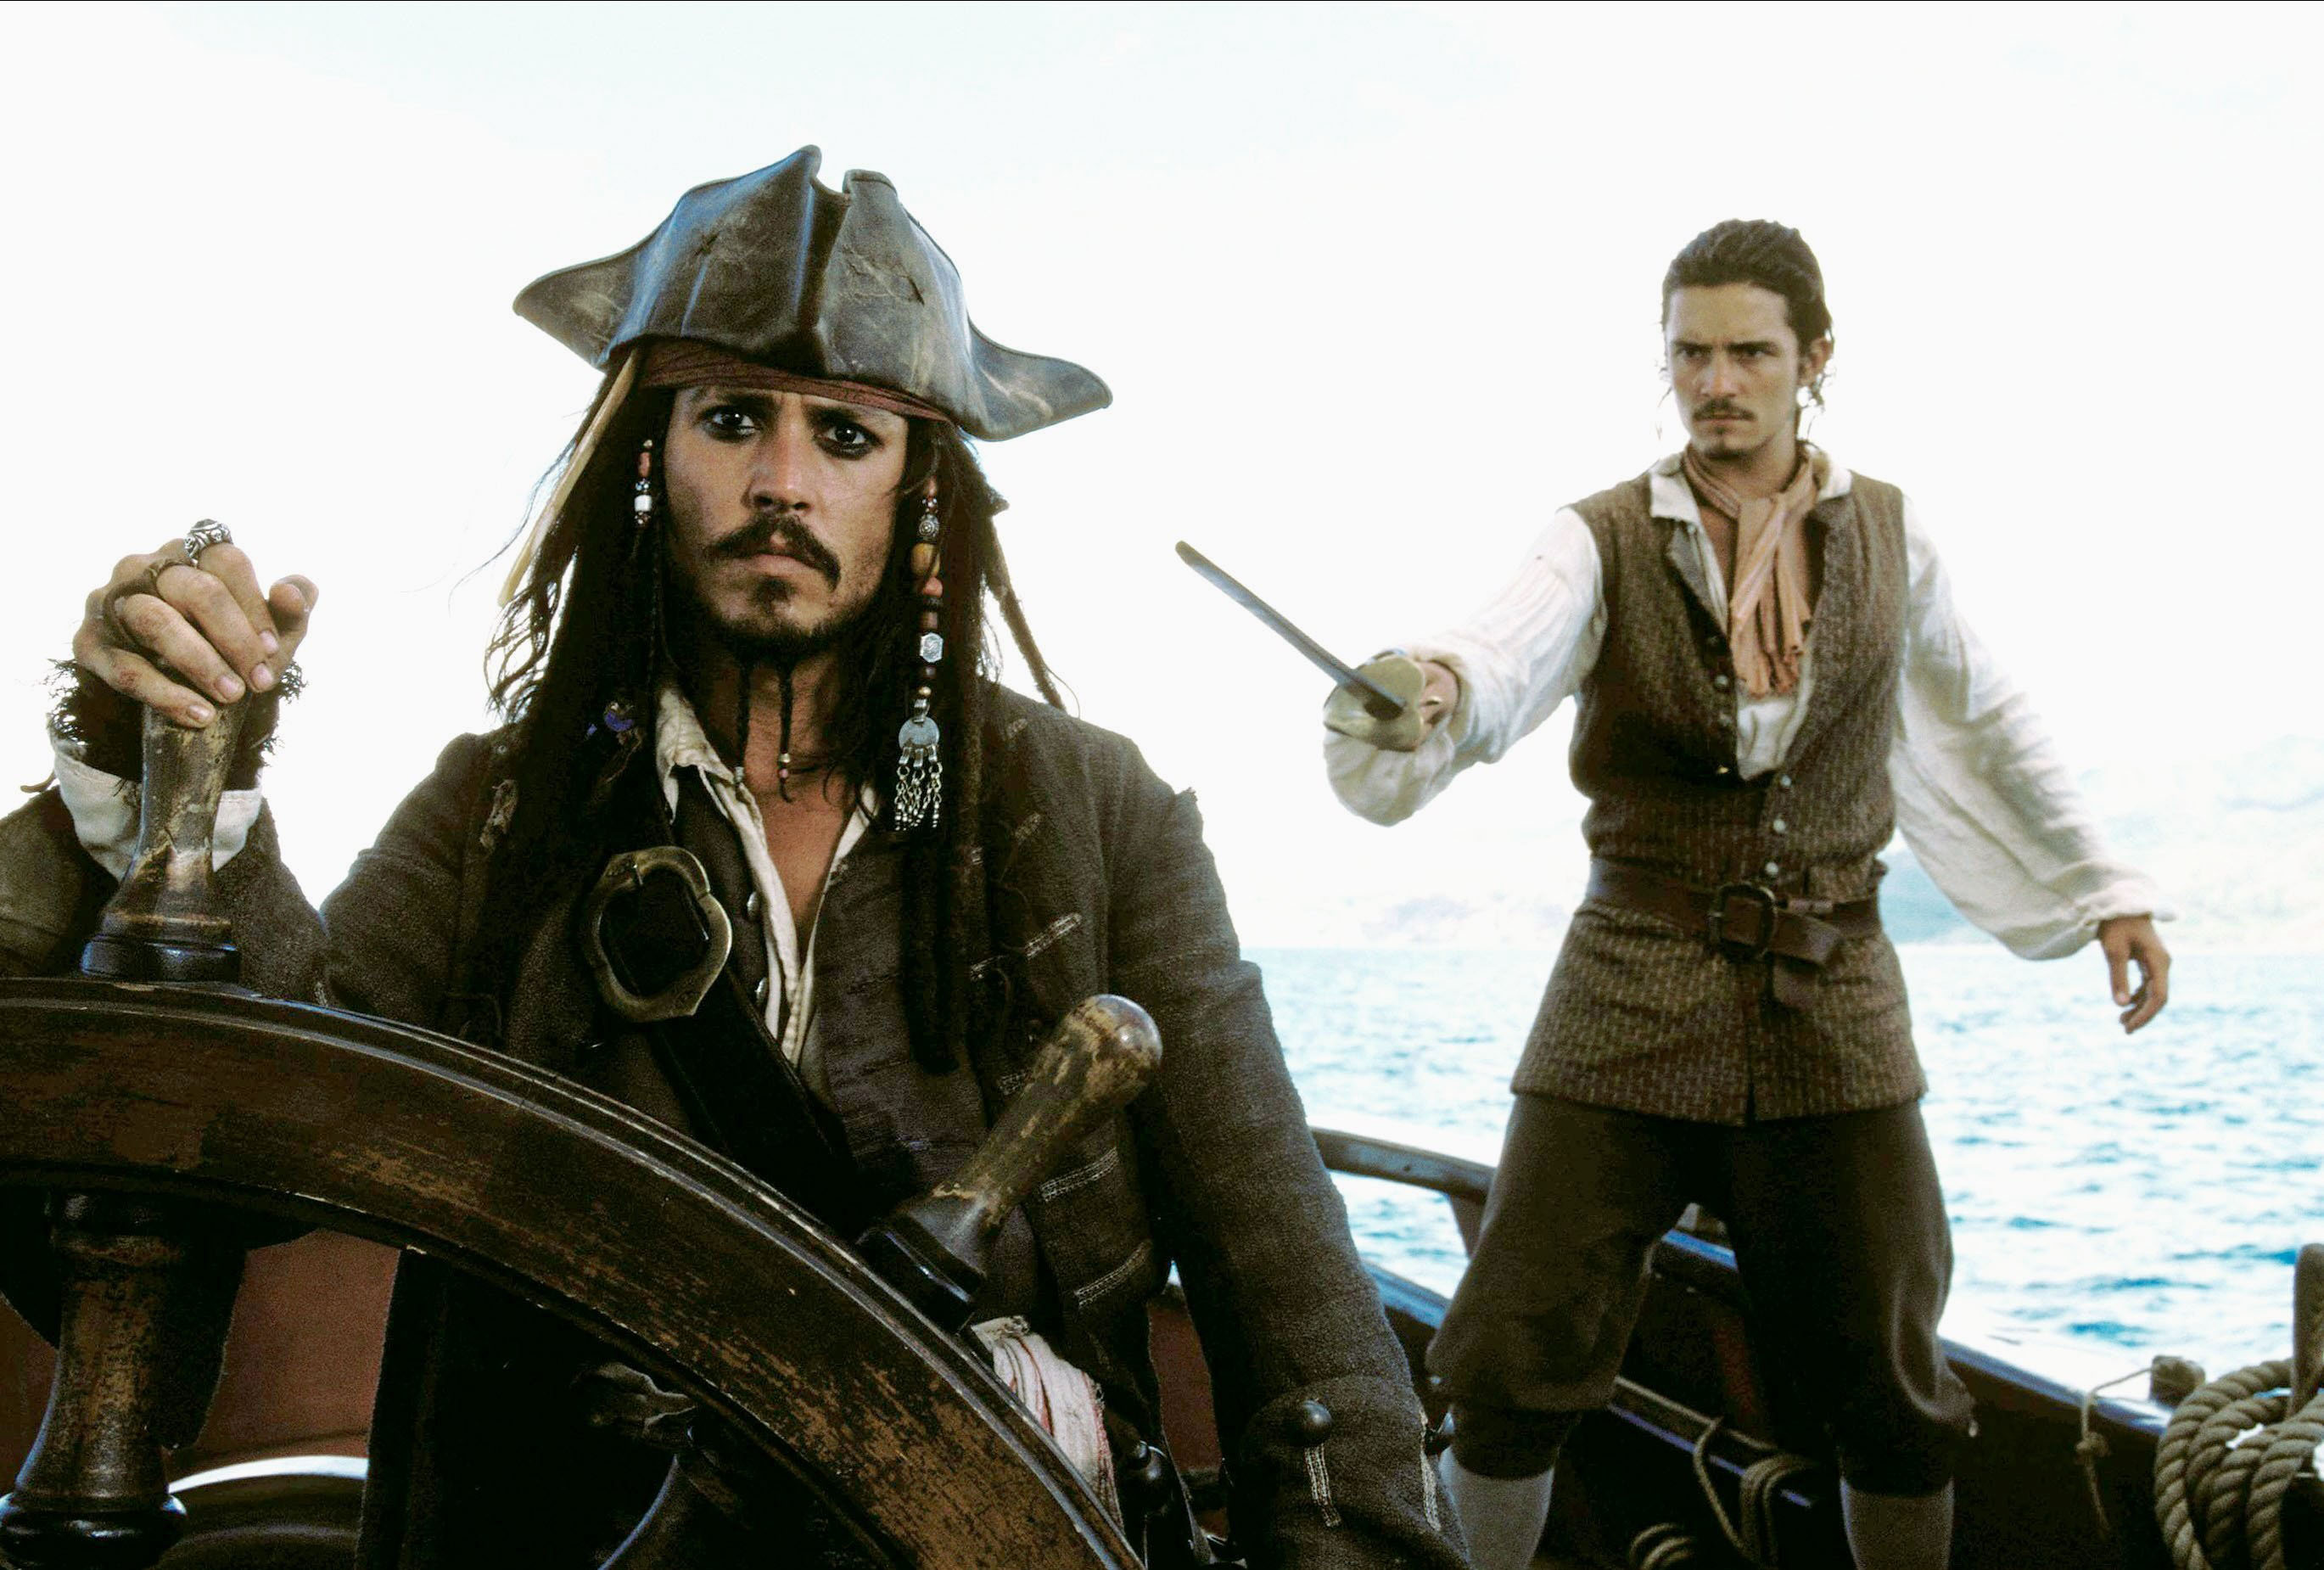 What would Captain Jack Sparrow                      say if the Black Pearl was a male?